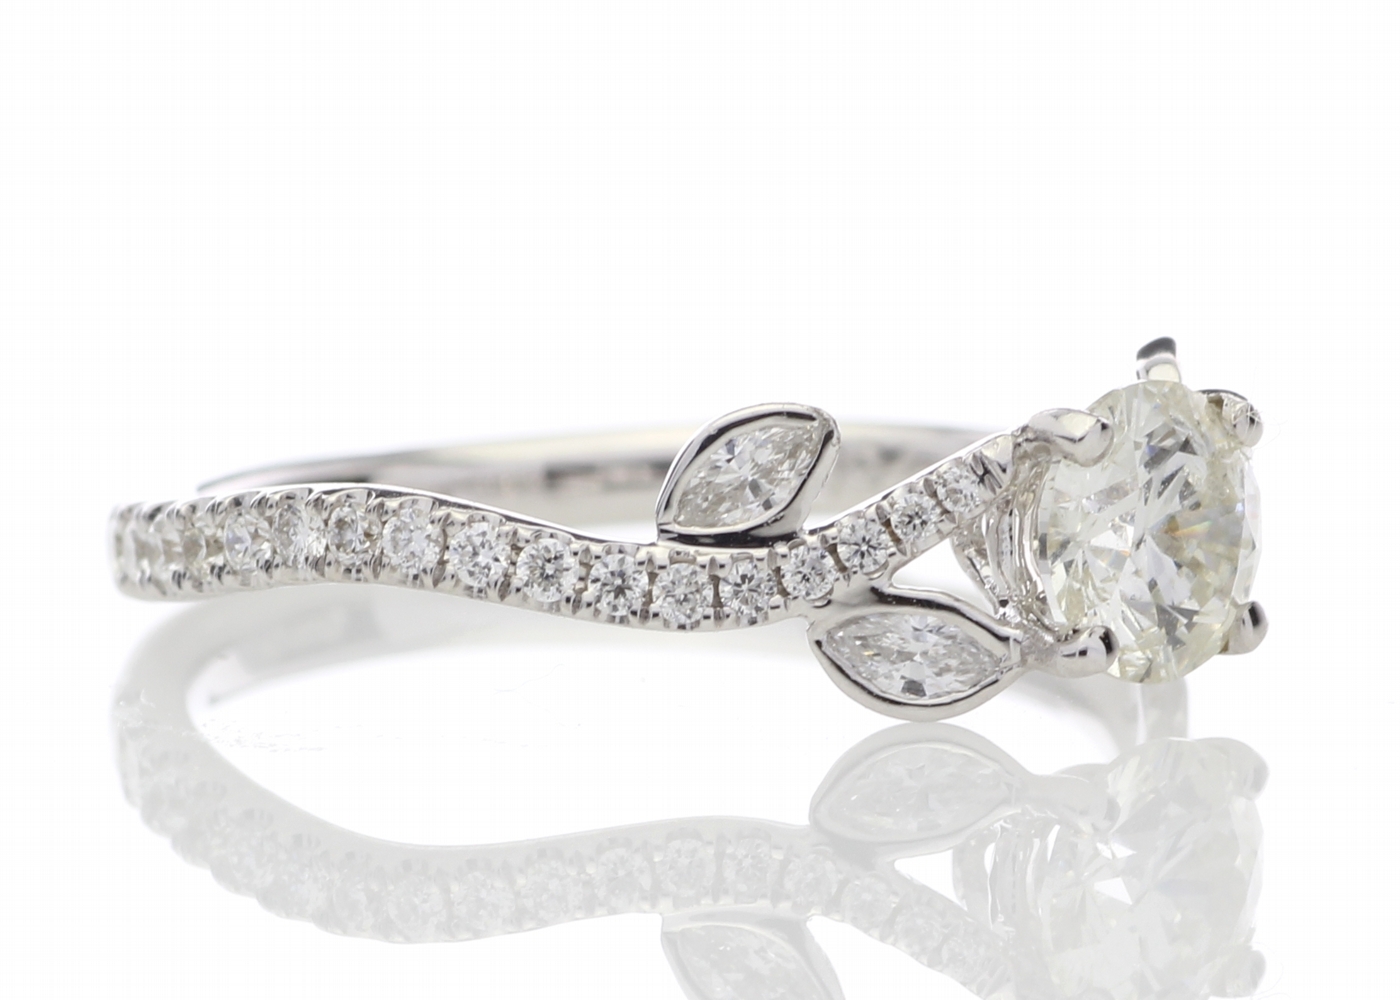 18ct White Gold Single Stone Diamond Ring With Stone Set Shoulders (0.55) 0.91 Carats - Image 4 of 5